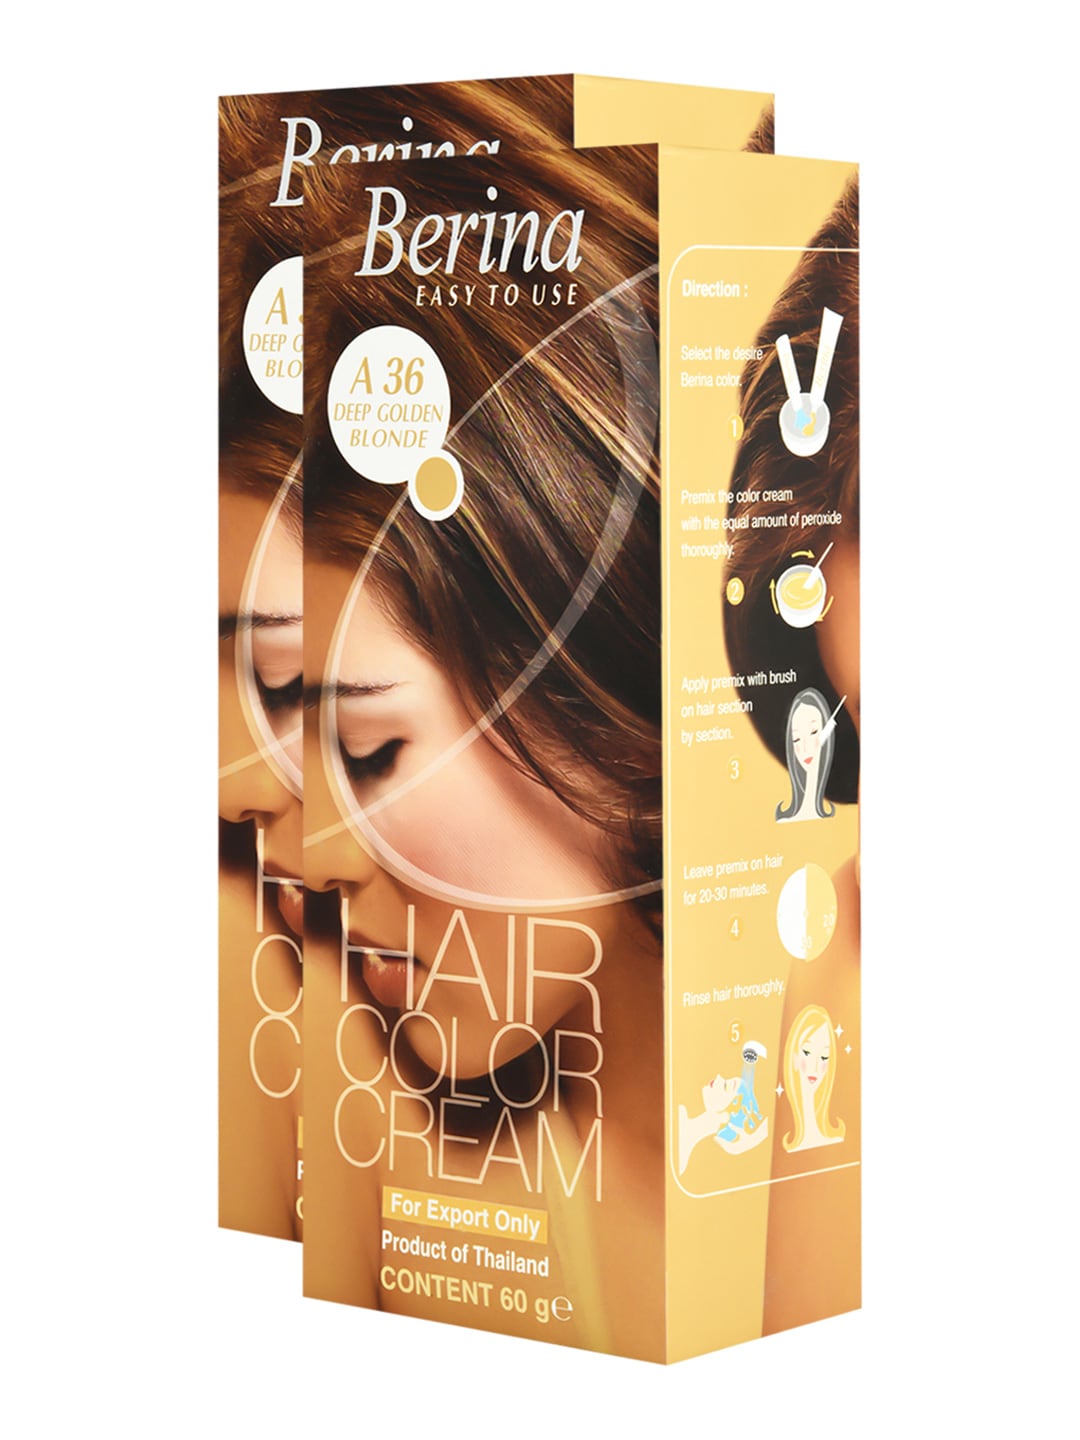 Berina Pack of 2 Hair Color Cream A36 Deep Golden Blonde Price in India